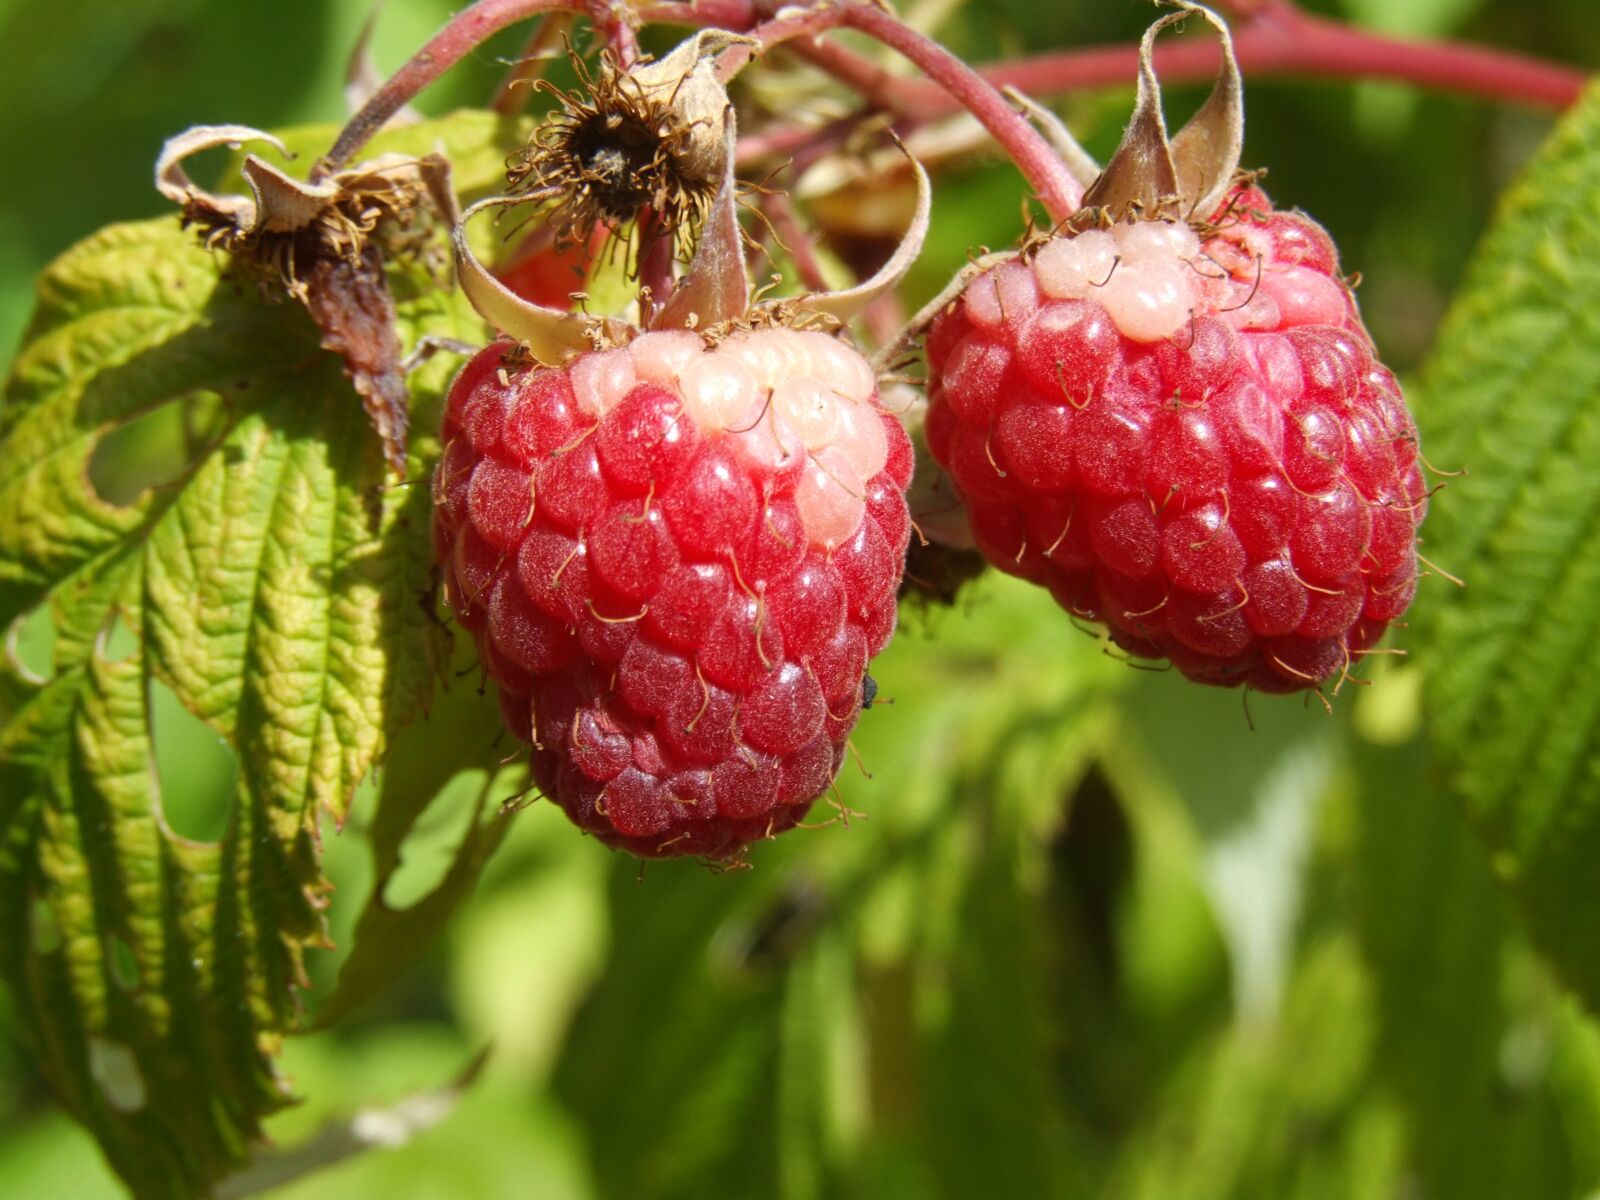 Fujifilm FinePix S9500 sample photo. Raspberry, agriculture, fruit photography